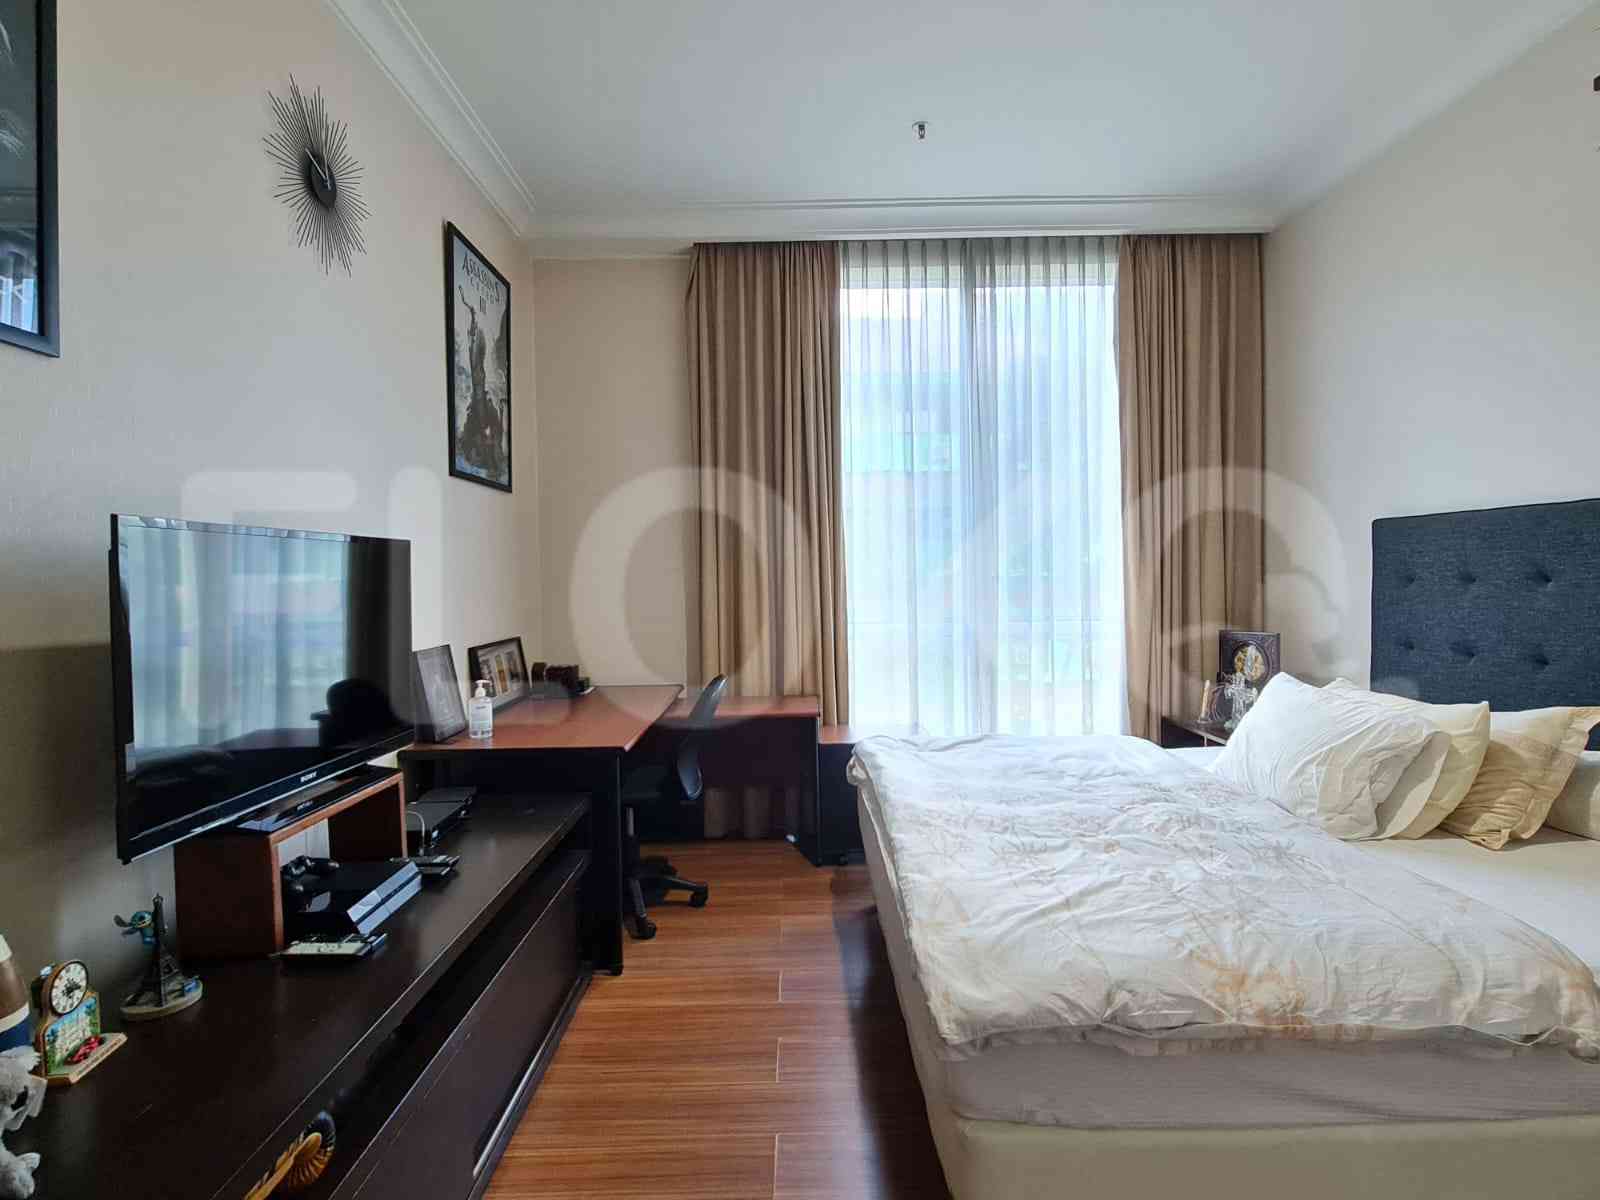 3 Bedroom on 2nd Floor for Rent in Pakubuwono View - fgace9 2